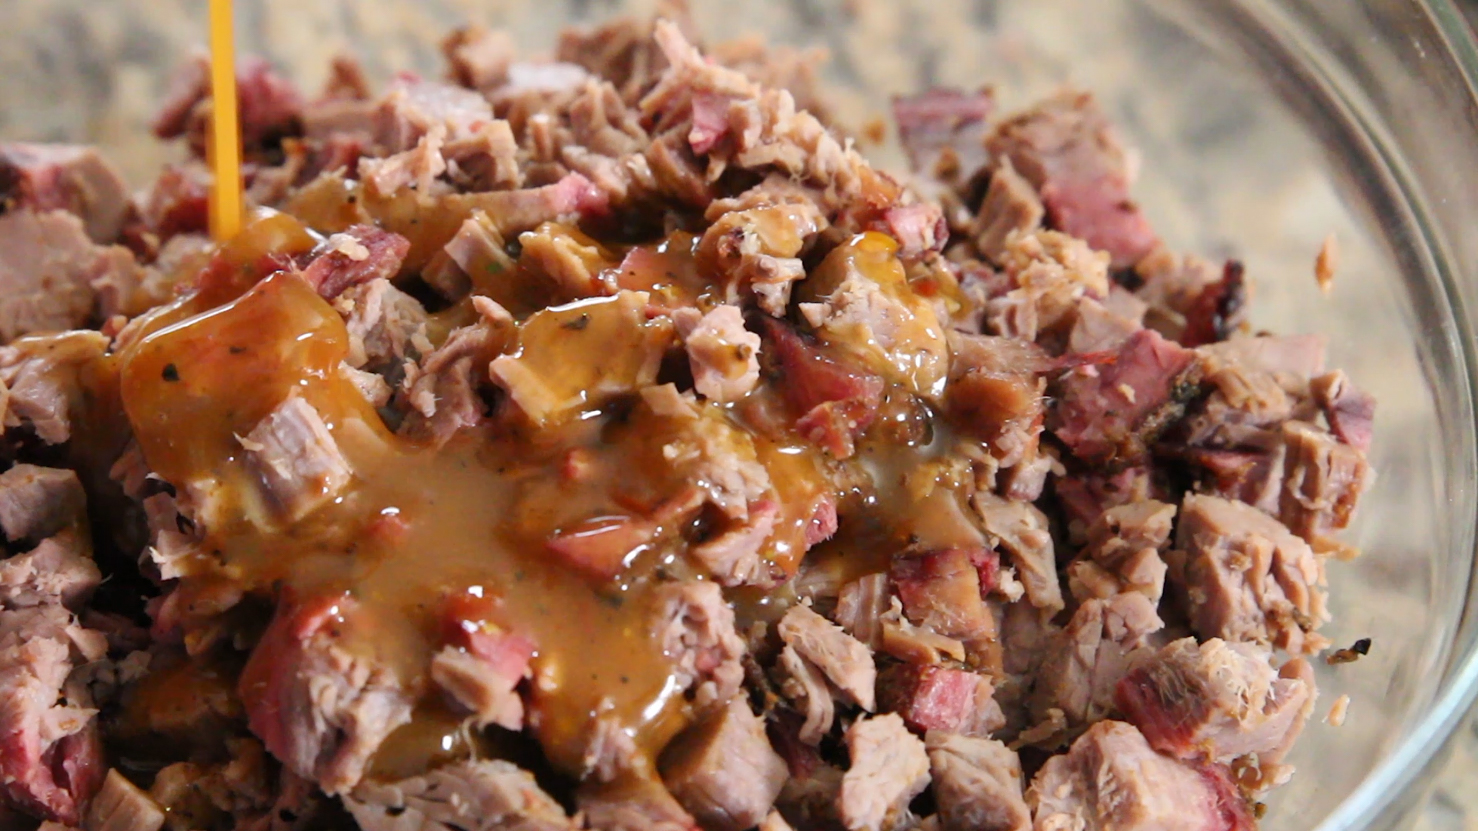 Chopped brisket being sauced with our dr pepper barbecue sauce